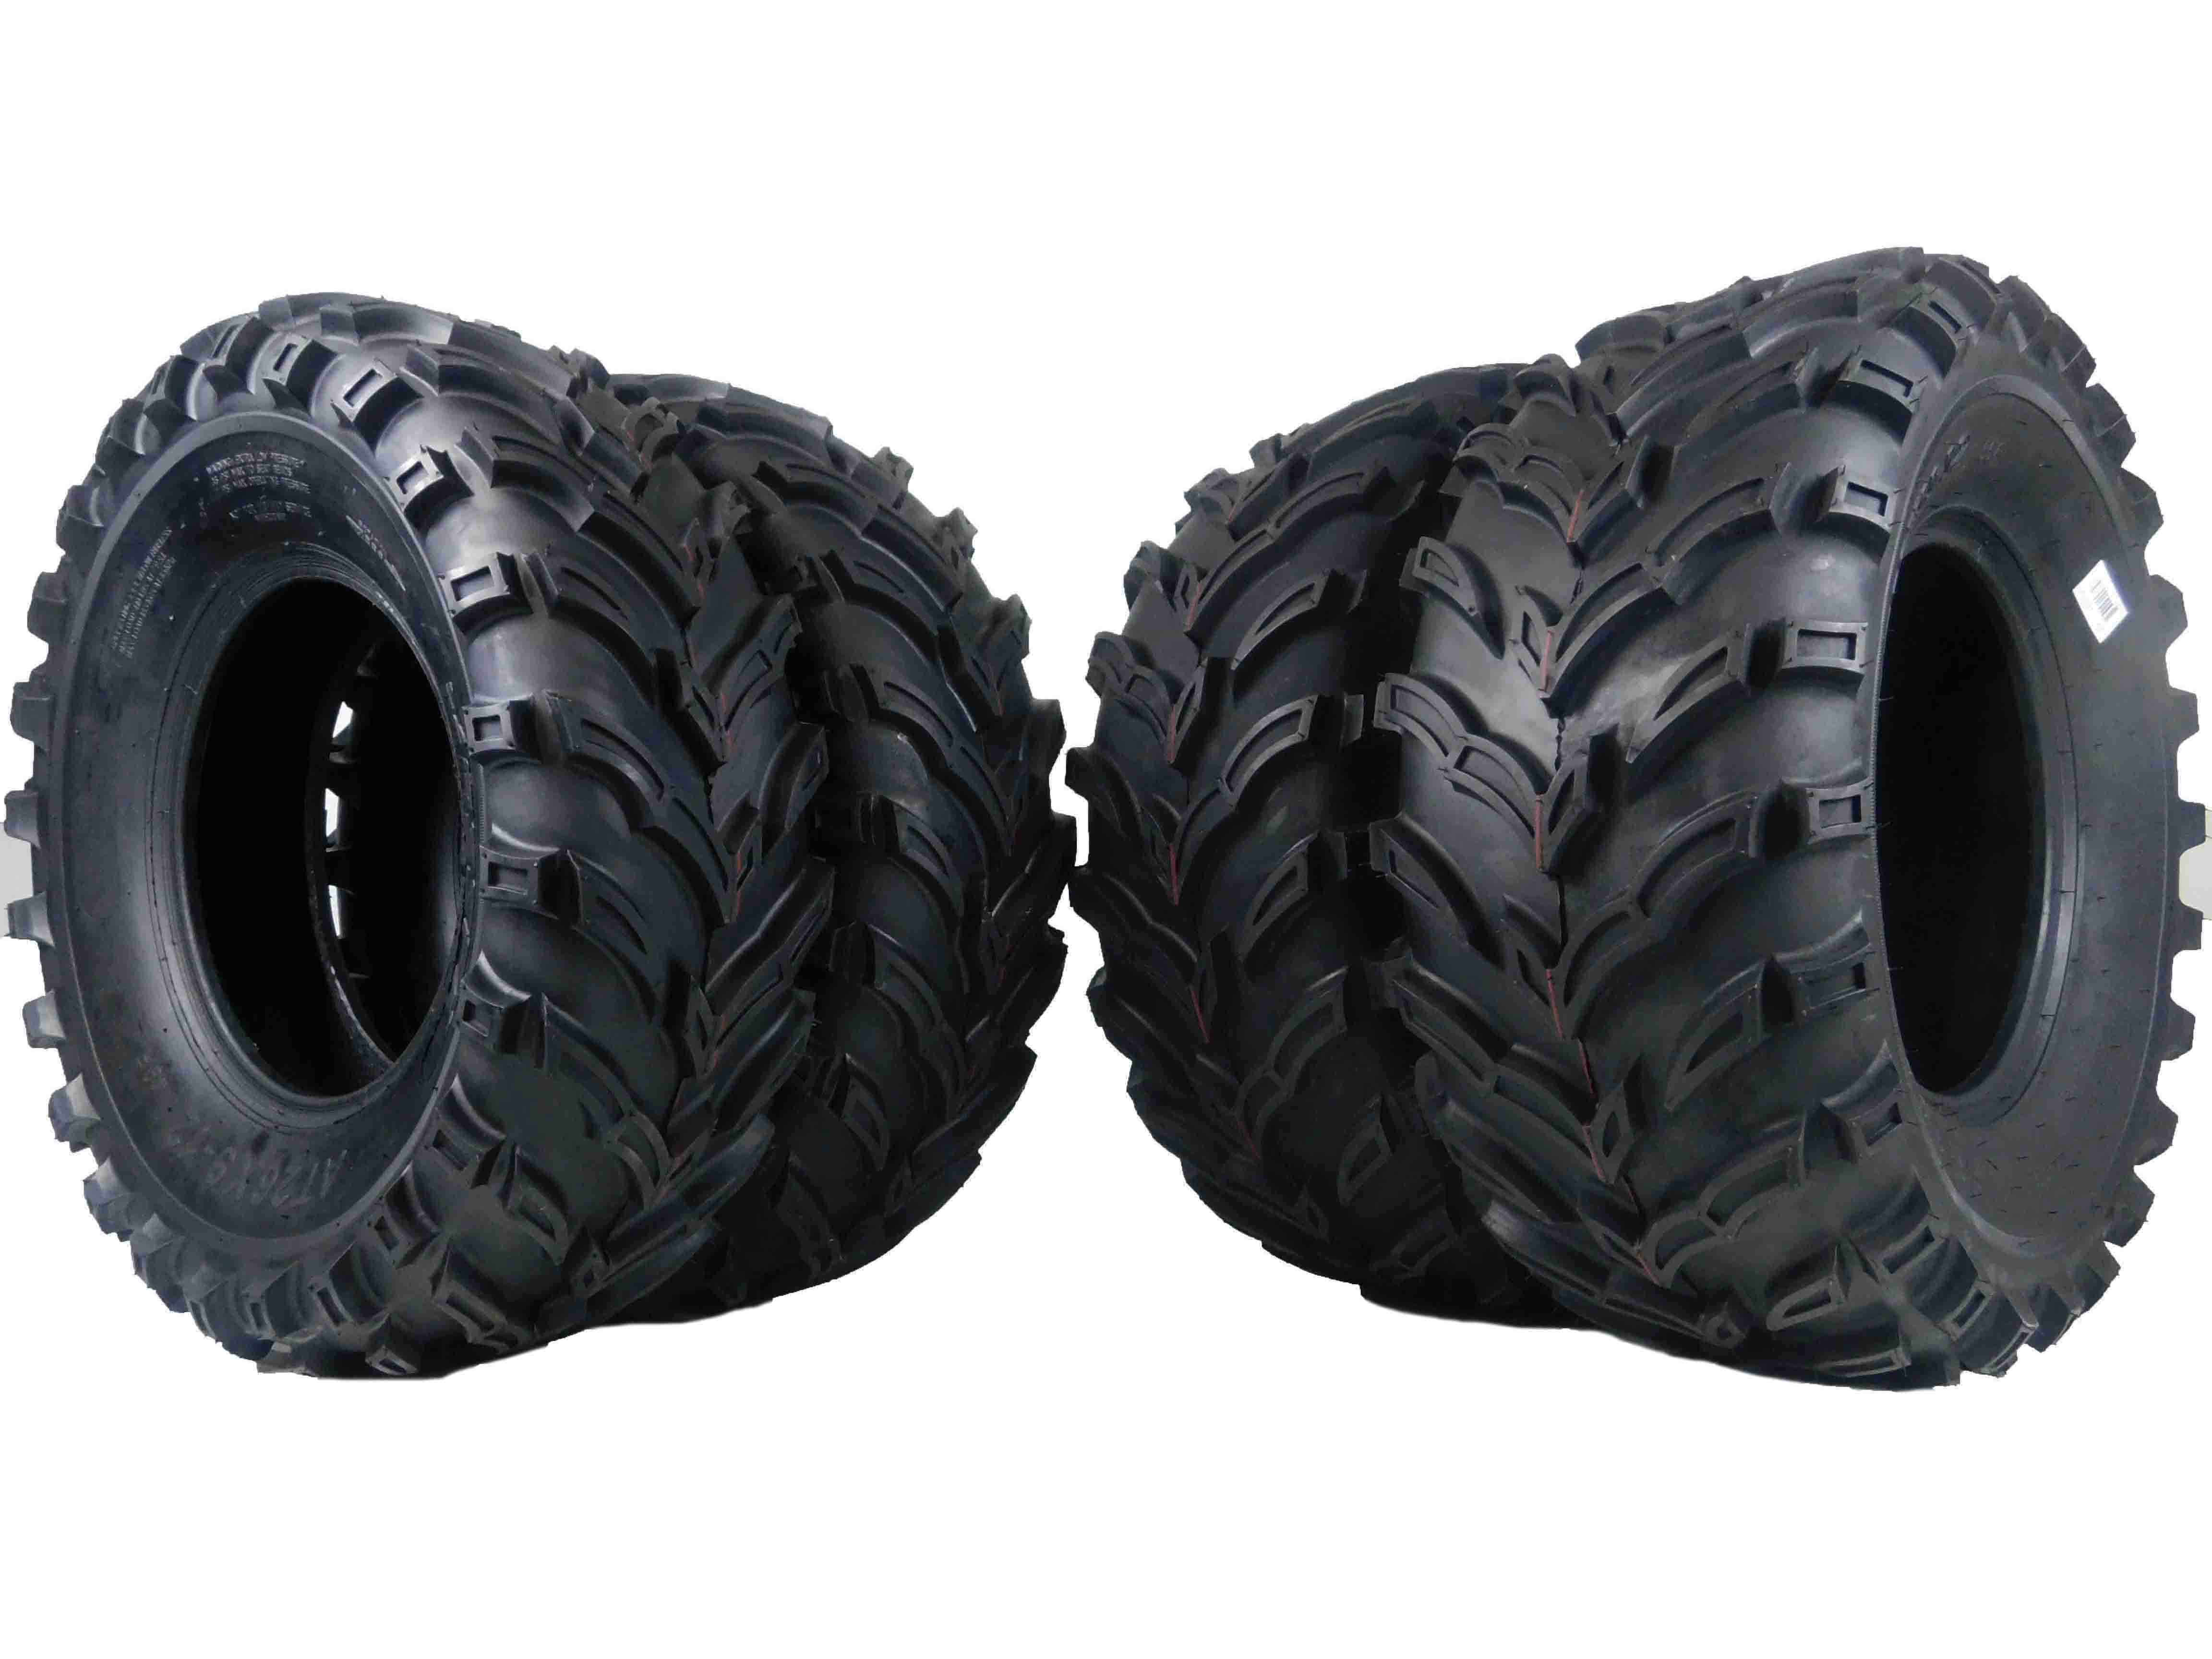 ATV MS Tire 4 set 25x8-12 Front 25x10-12 Rear 6Ply Tires MD 